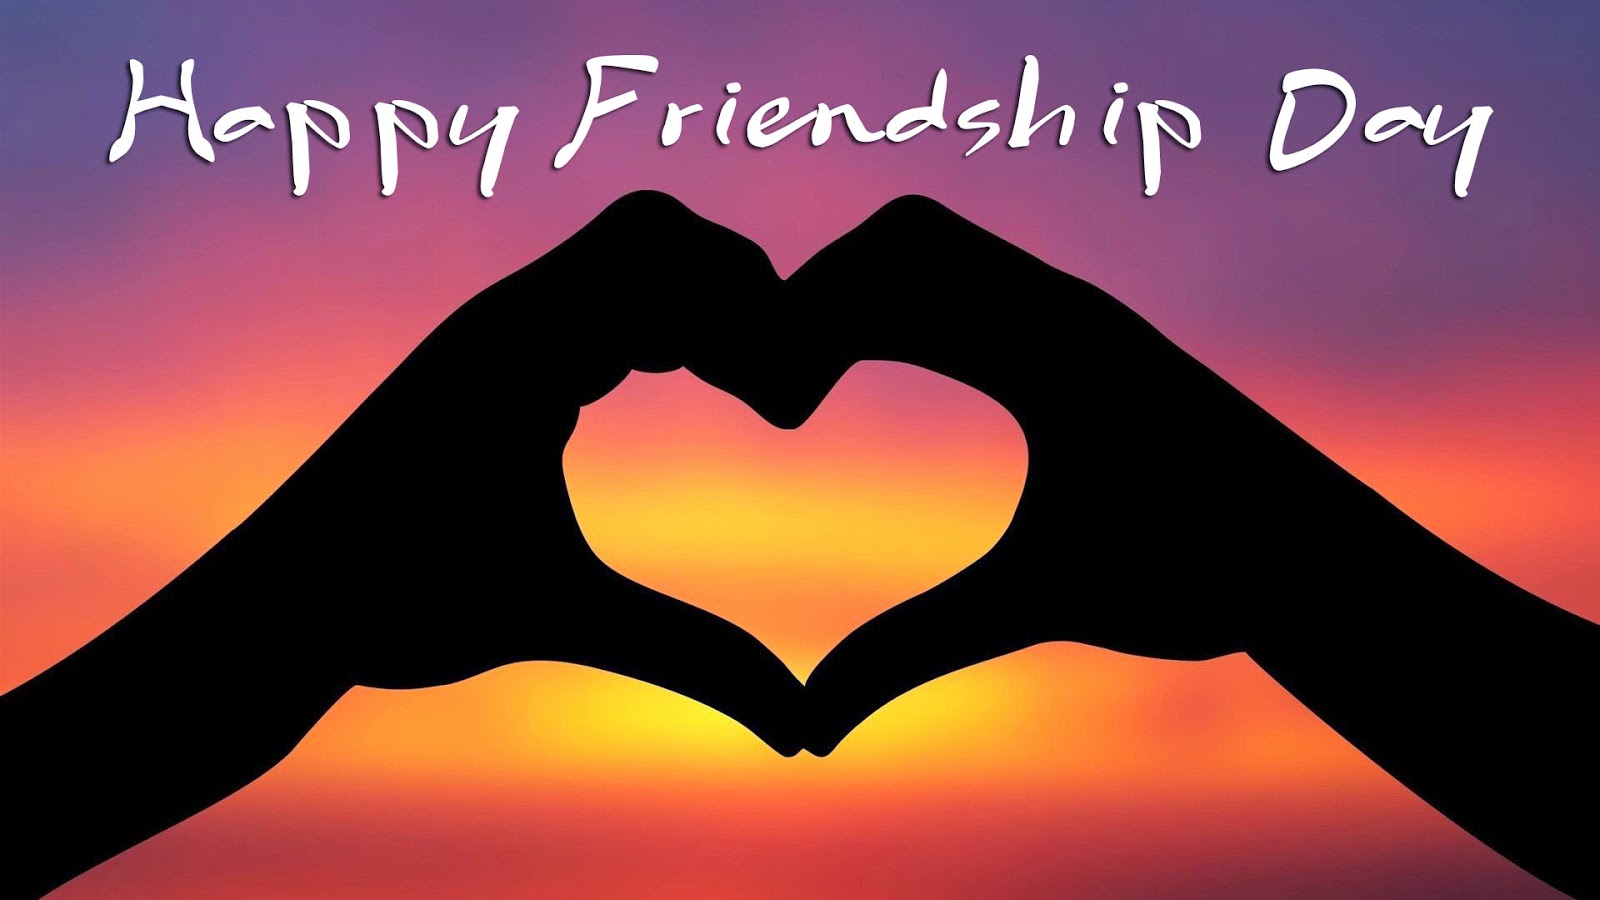 Happy Friendship Day 2016 fb cover Images (13)